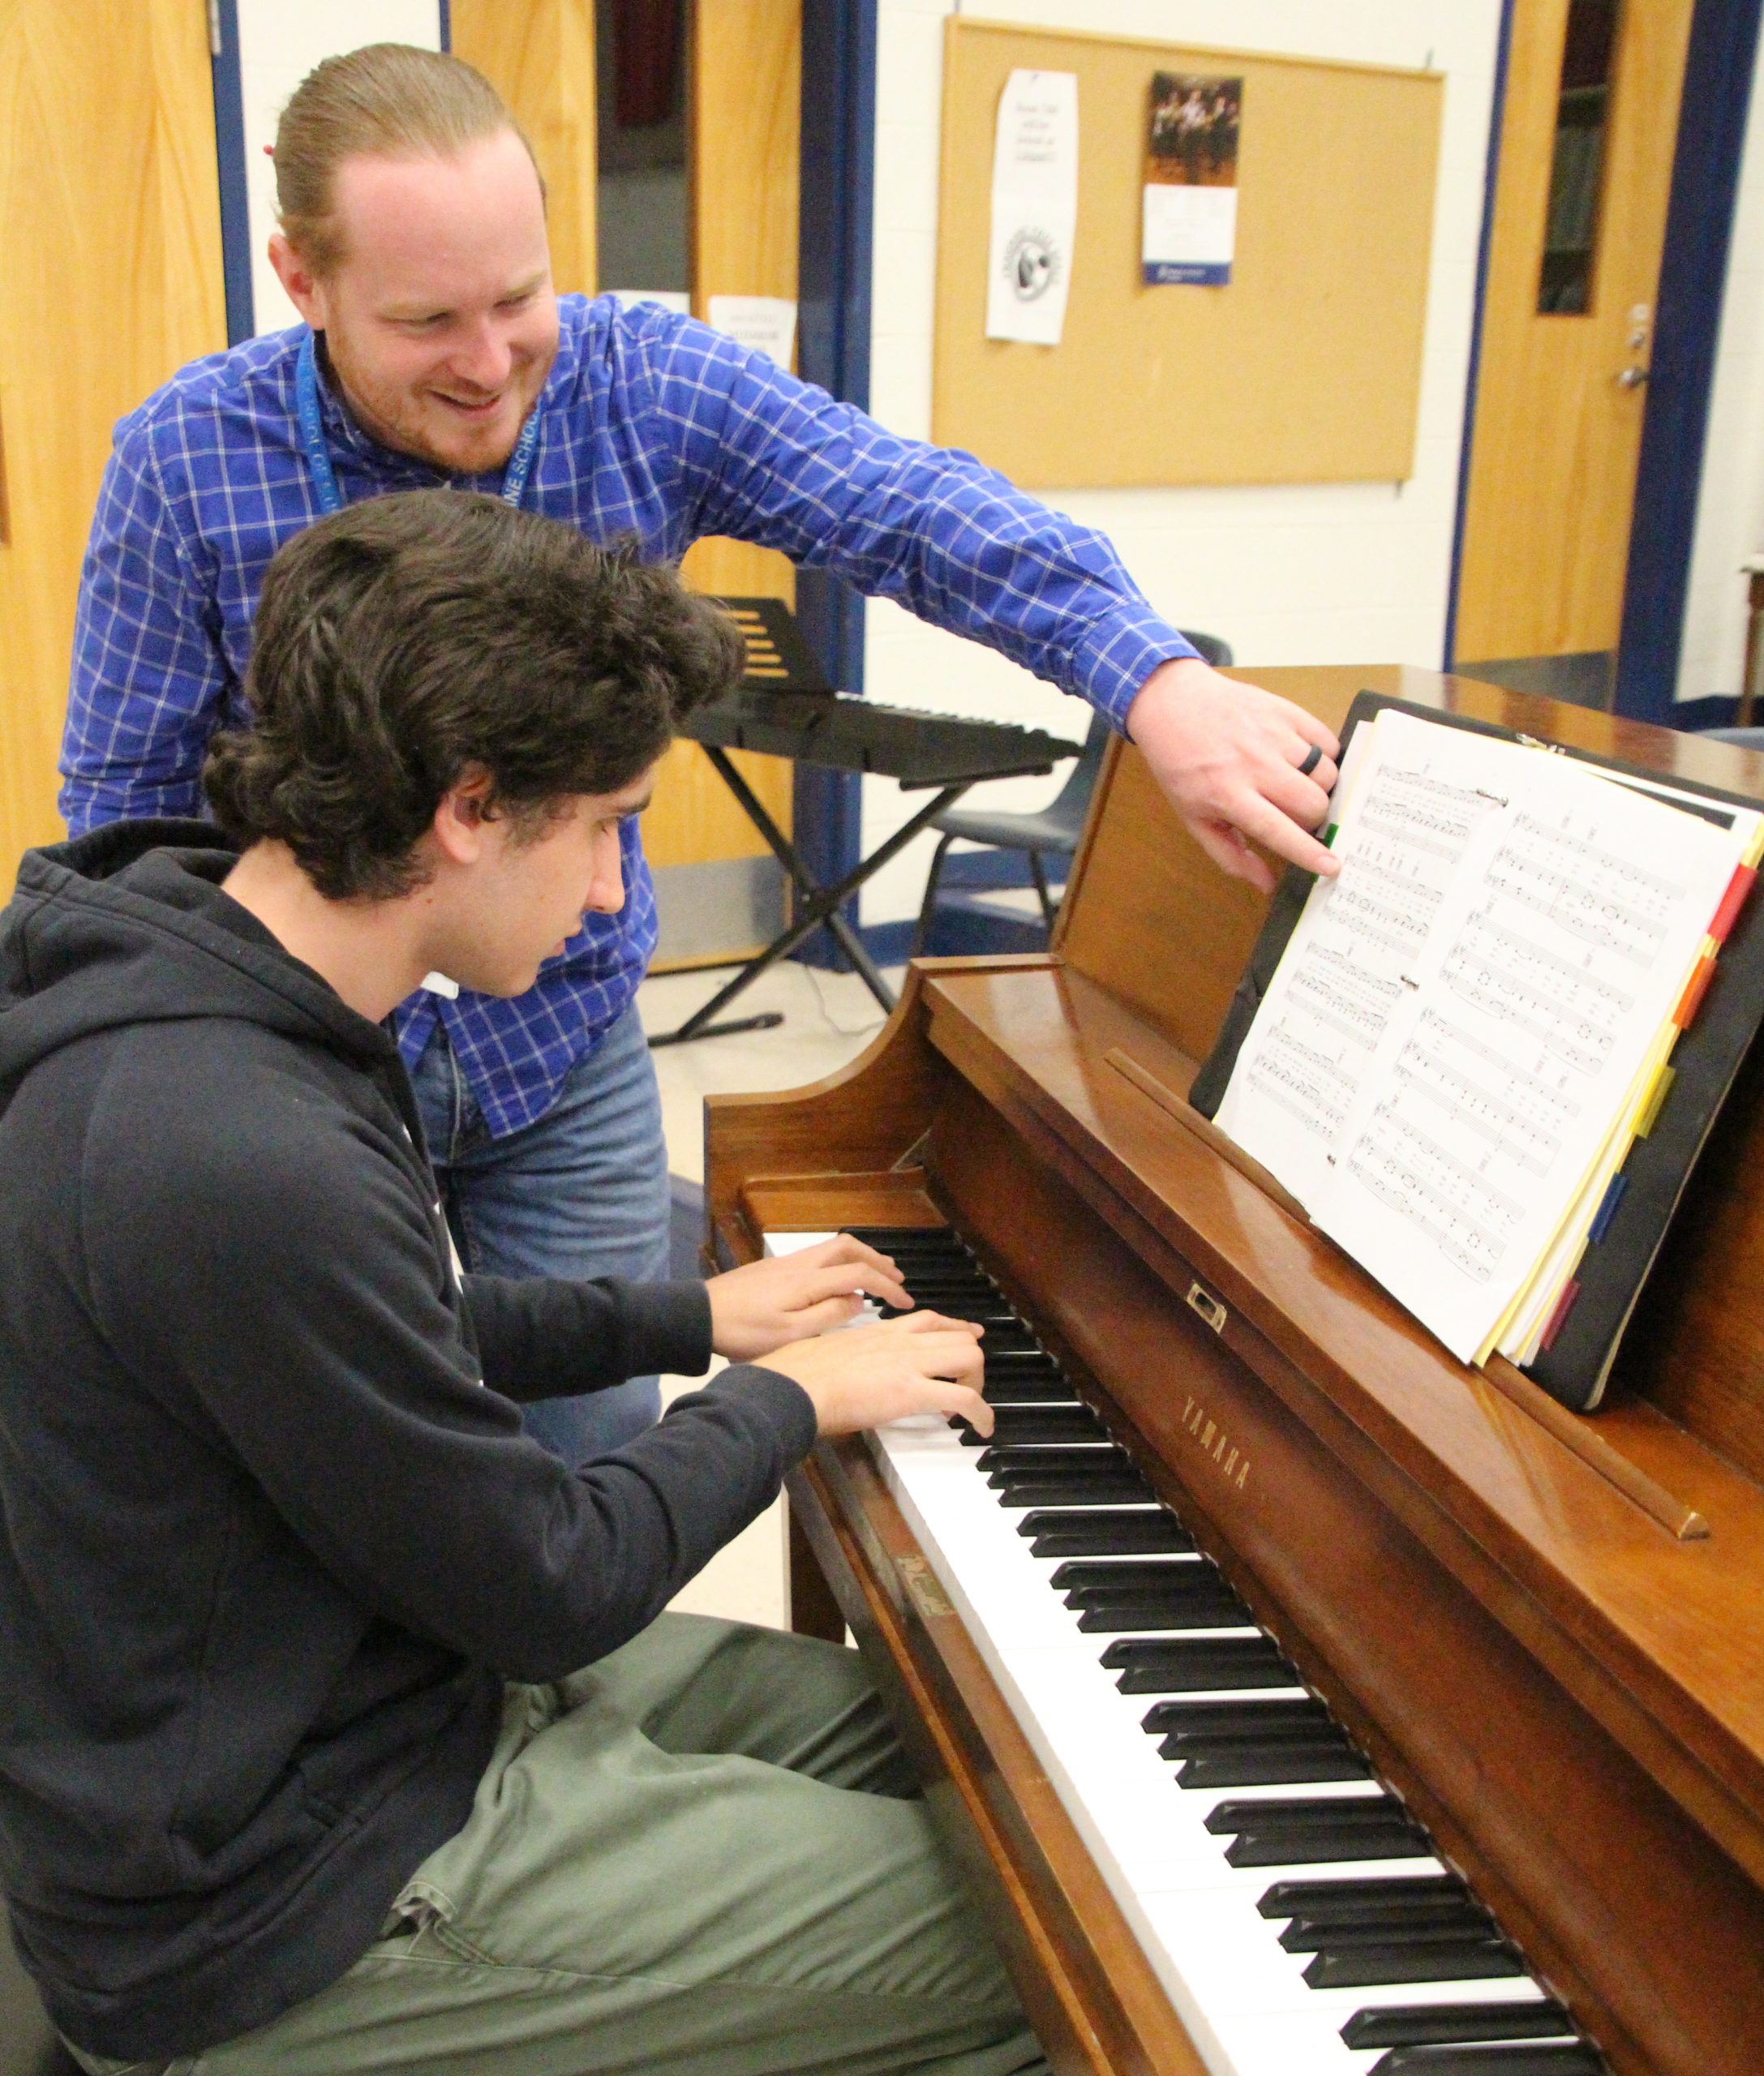 A music teacher is helping a student who's playing the piano. The teacher is pointing to the sheet music in front of the student.